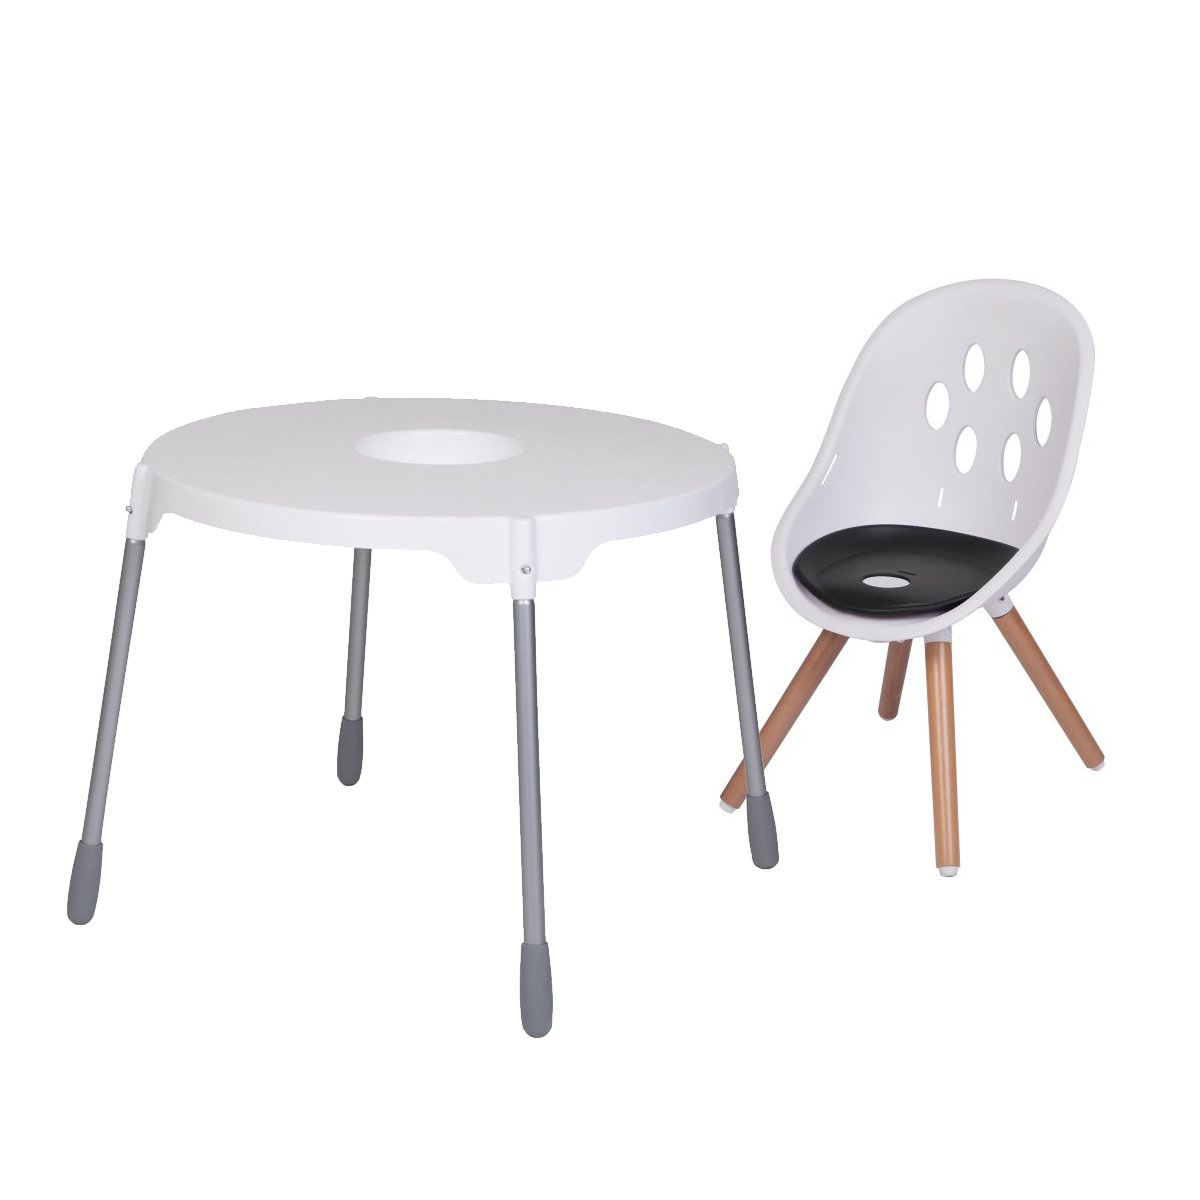 https://cdn.accentuate.io/7237223317557/19118870462517/phil_and_teds_poppy_wood_leg_high_chair_to_my_chair_dual_modes_1_combo-v1698267184390.jpg?1200x1200